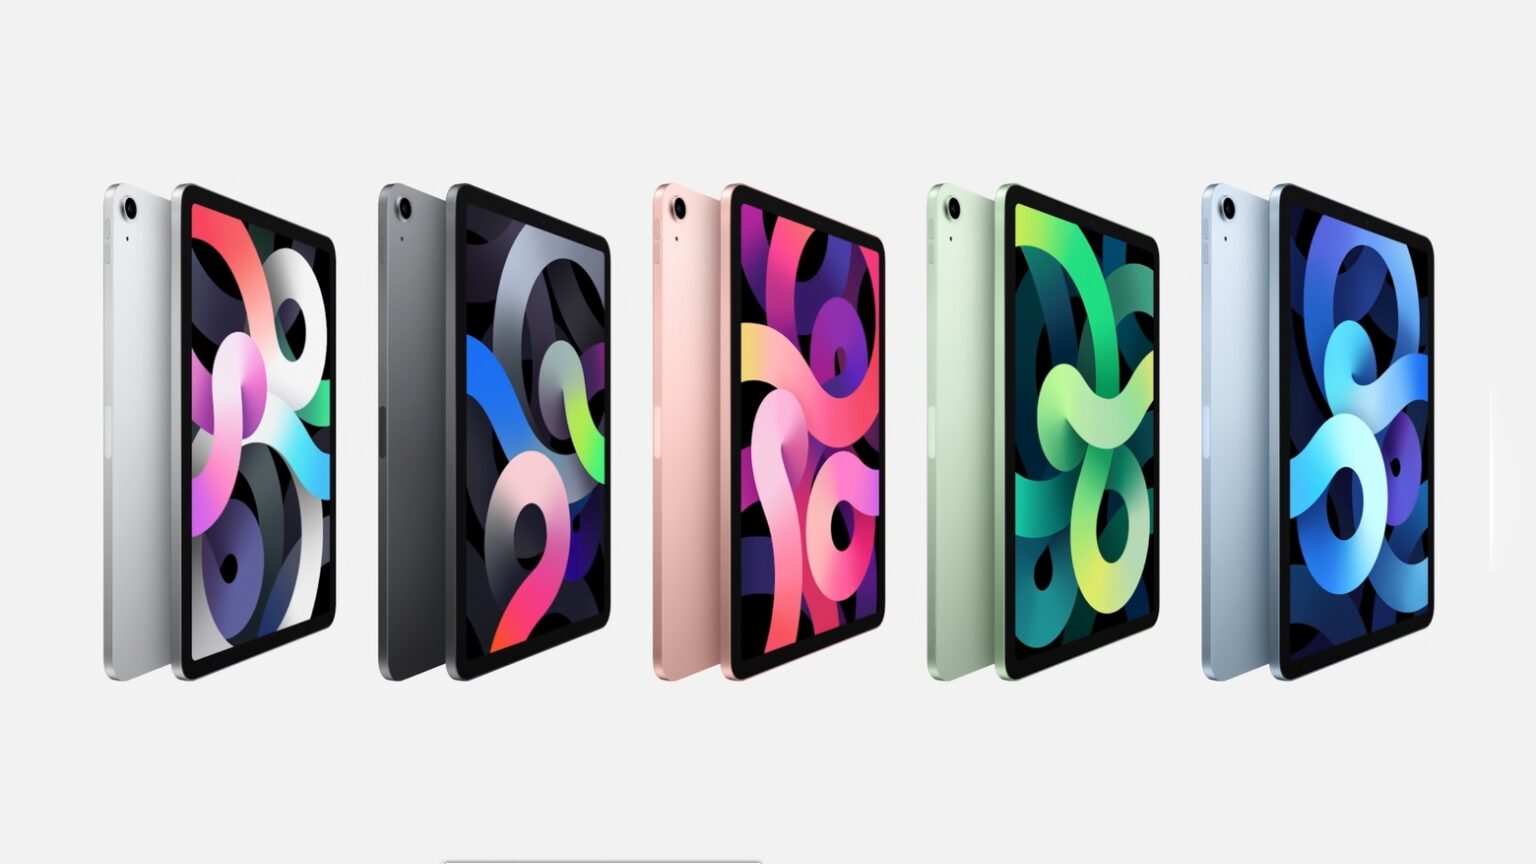 iPad Air 4 comes in a range of colors.